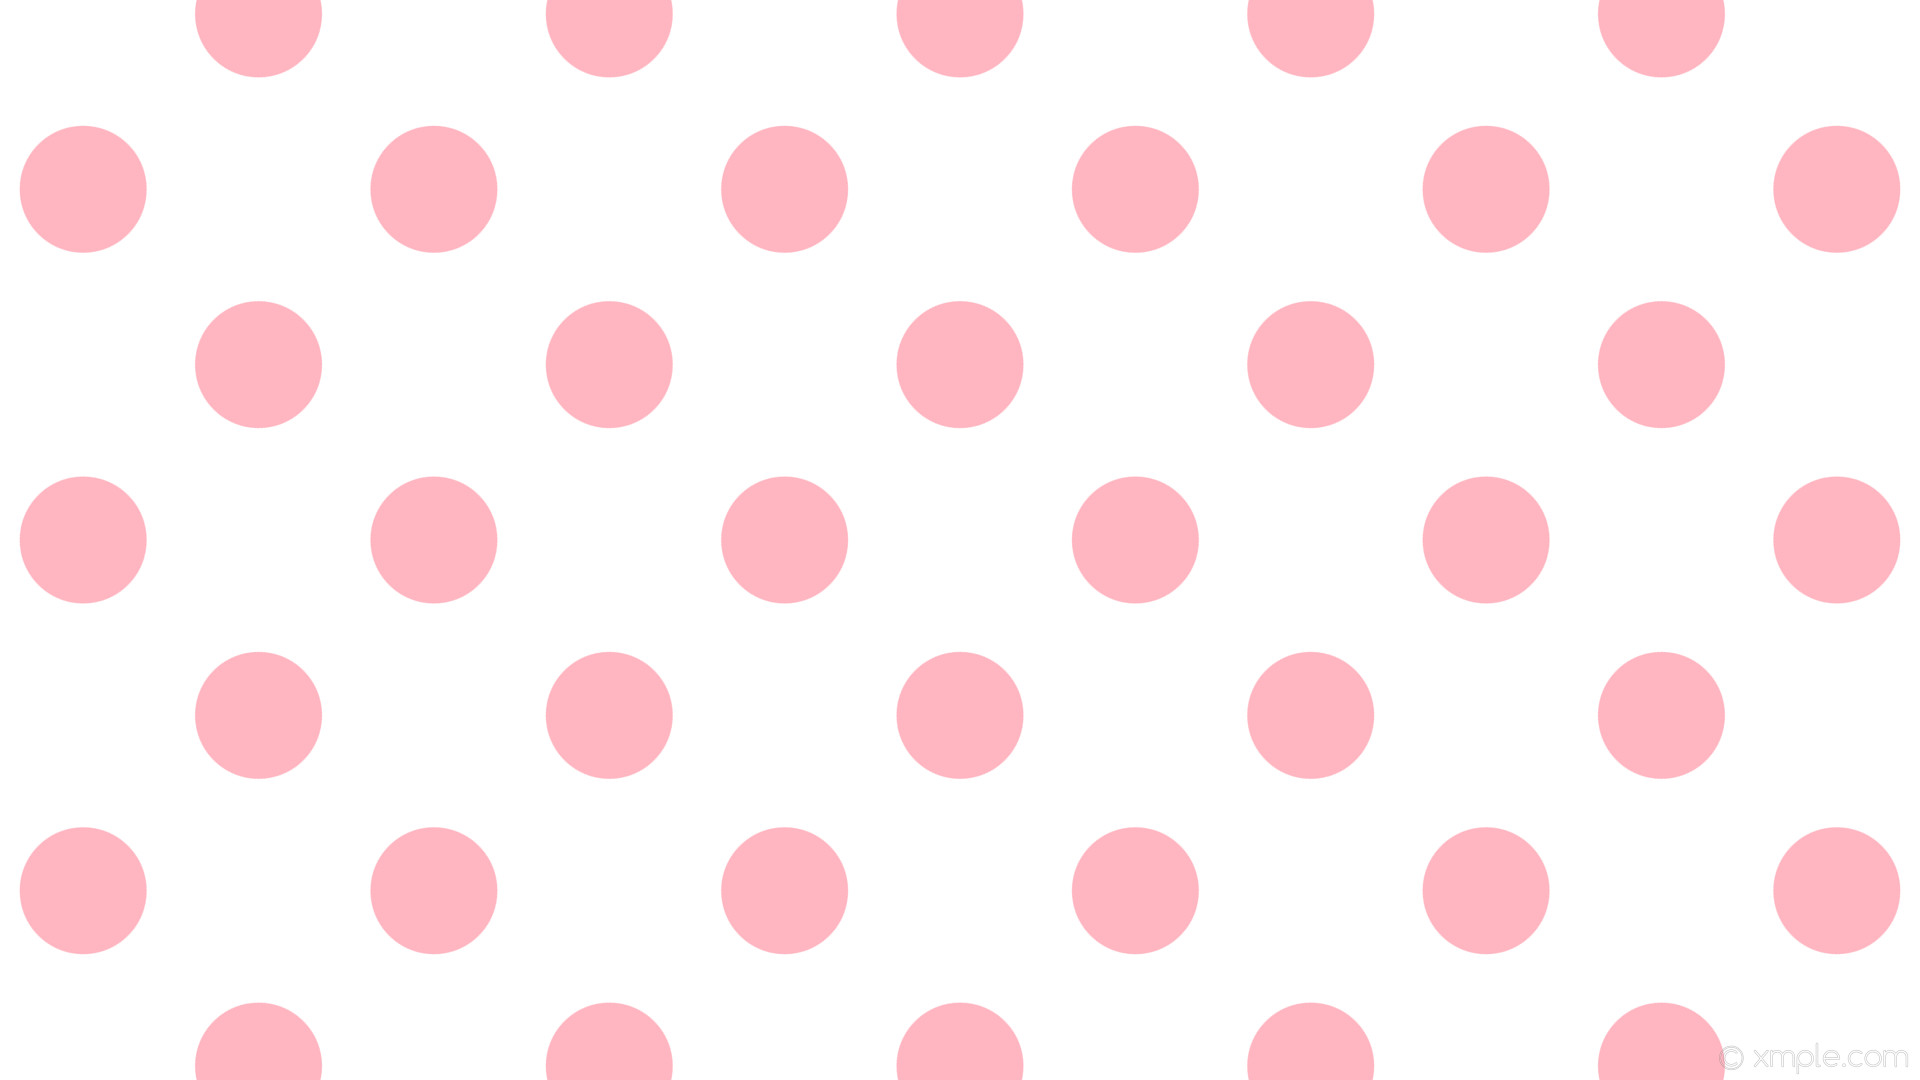 Free download White wallpaper with 5 cm pink dots [1024x1024] for your